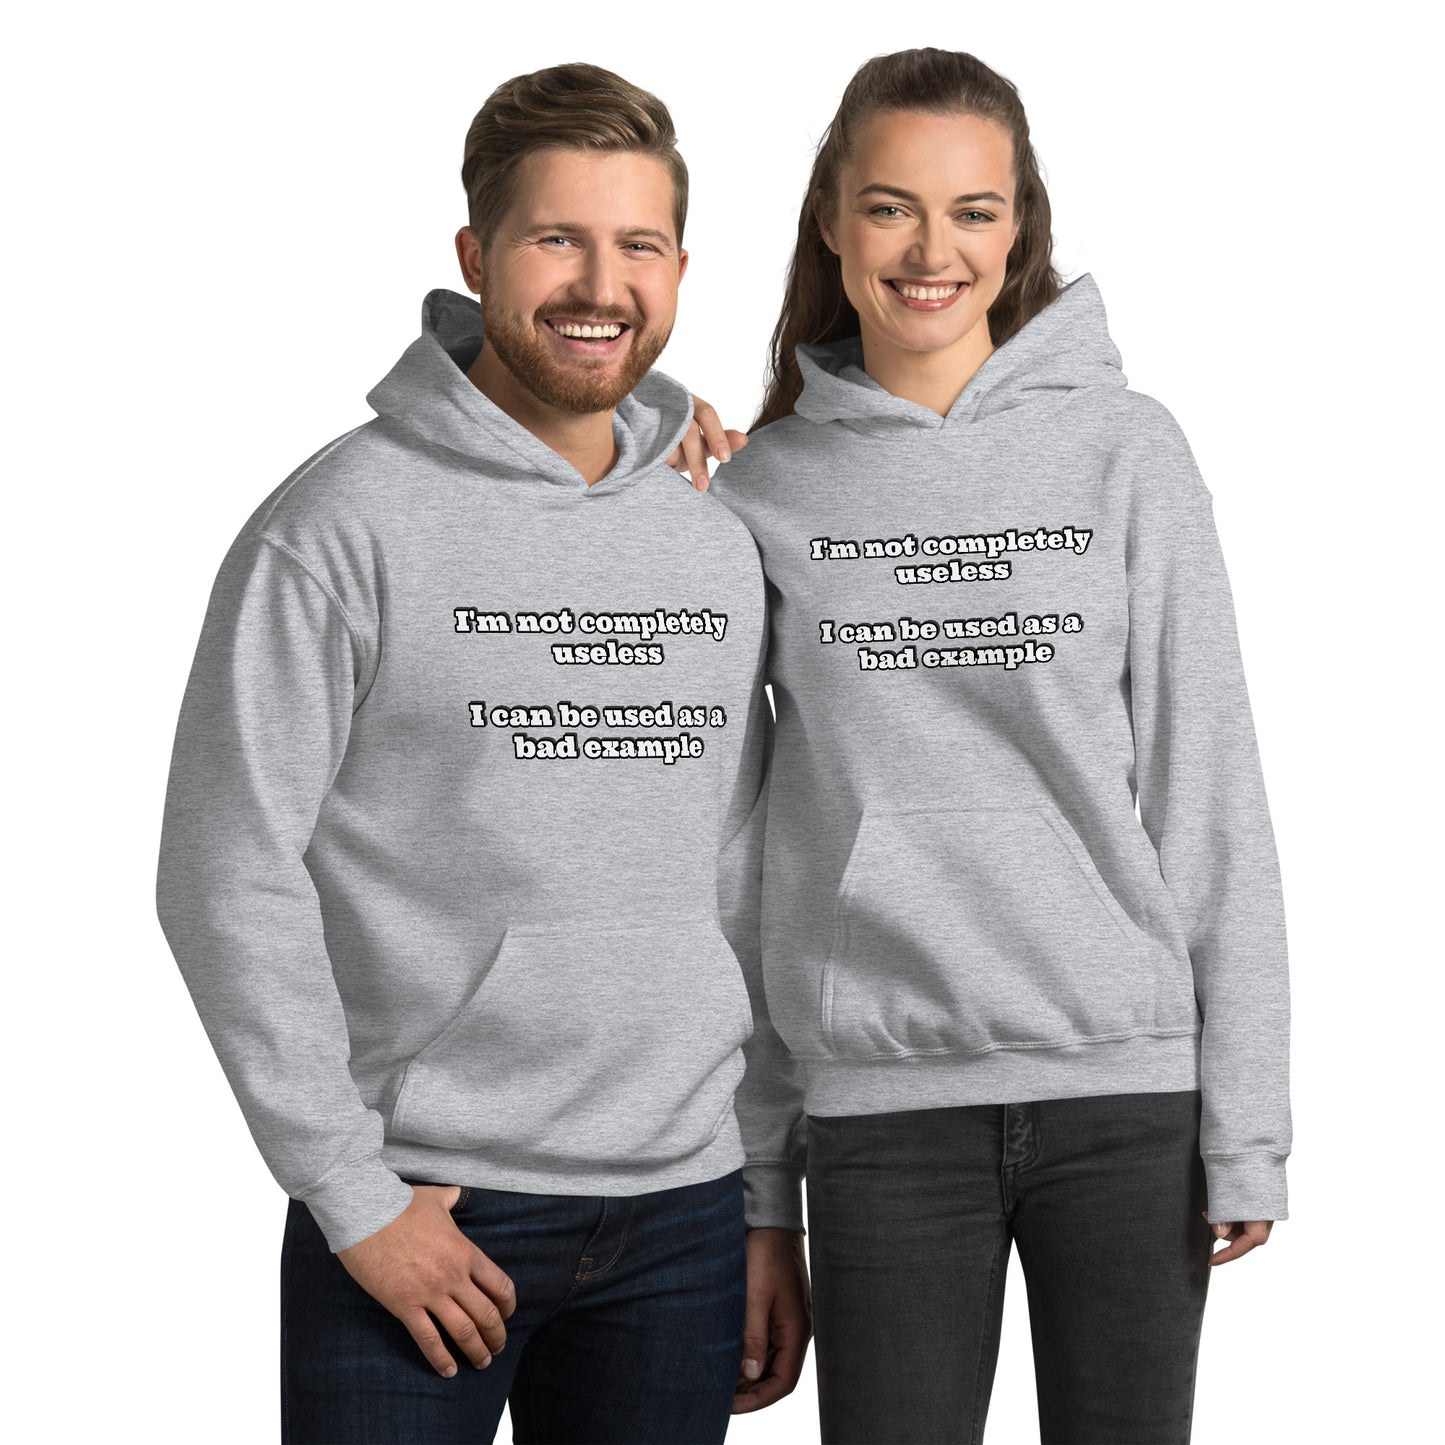 Man and women with grey hoodie with text “I'm not completely useless I can be used as a bad example”